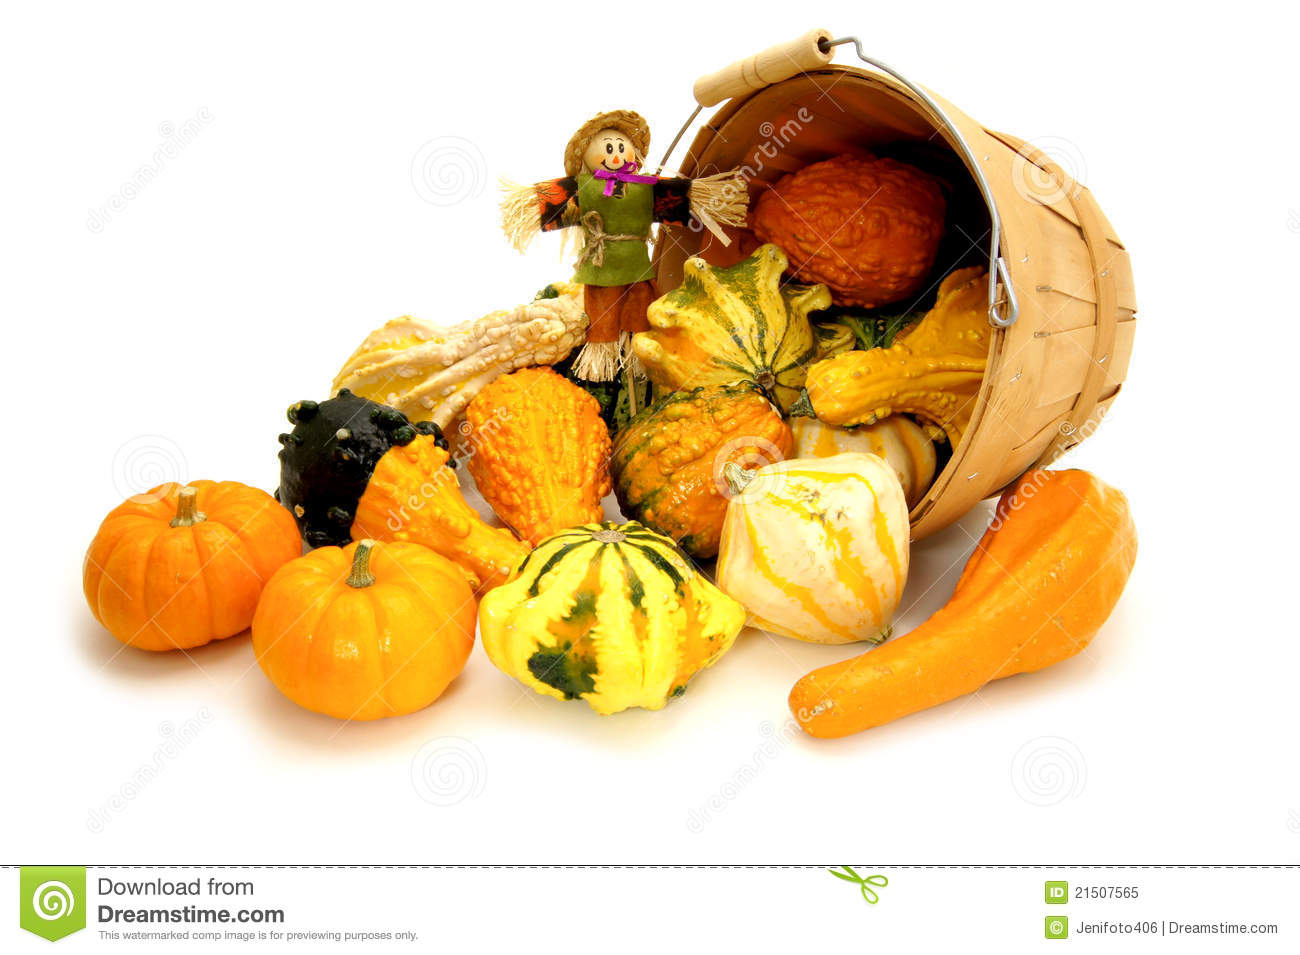 Harvest Time Royalty Free Stock Photo   Image  21507565